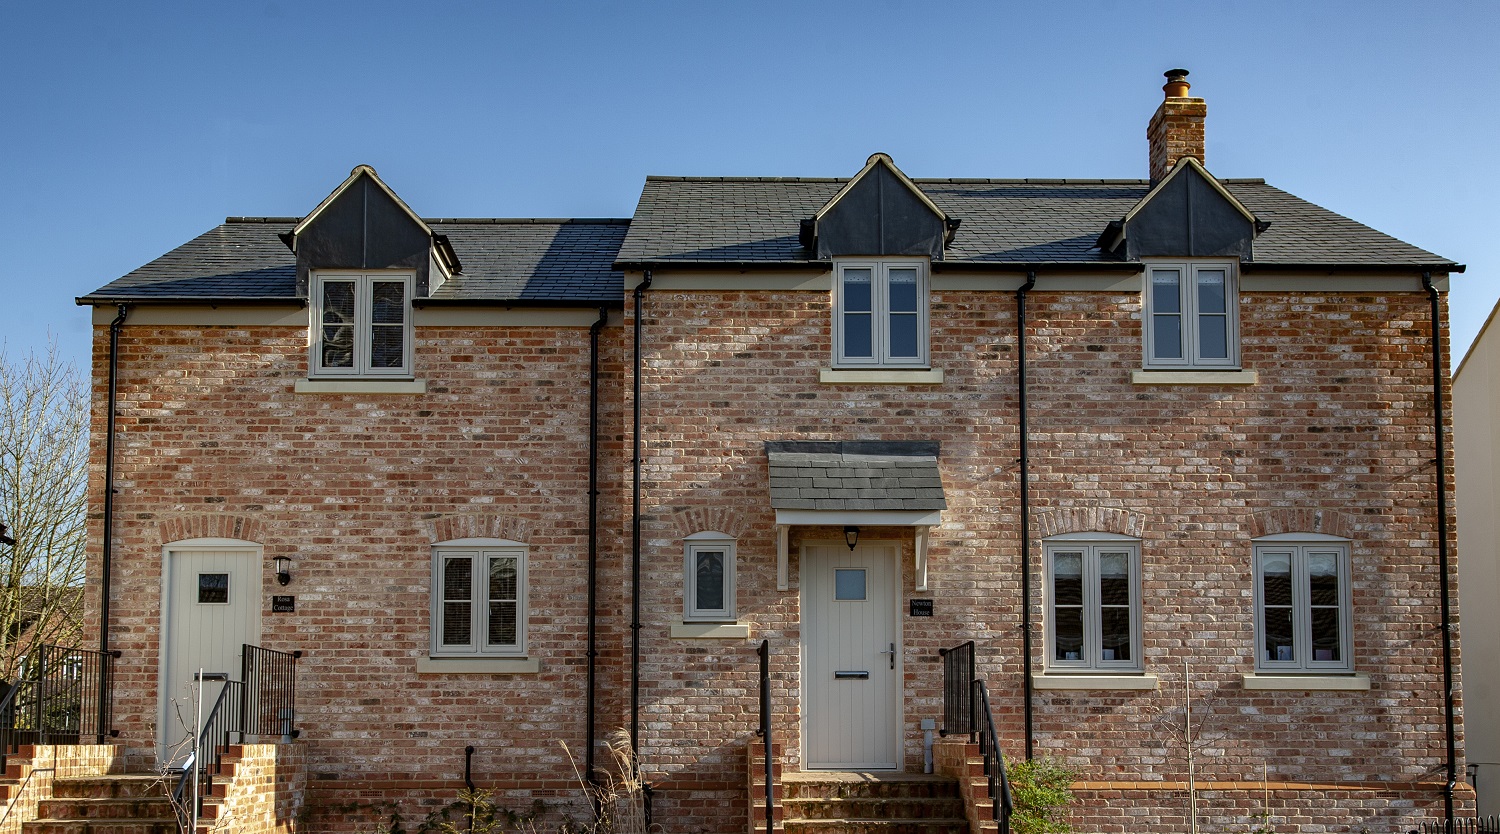 The WWA provides best practice guidance to housebuilders